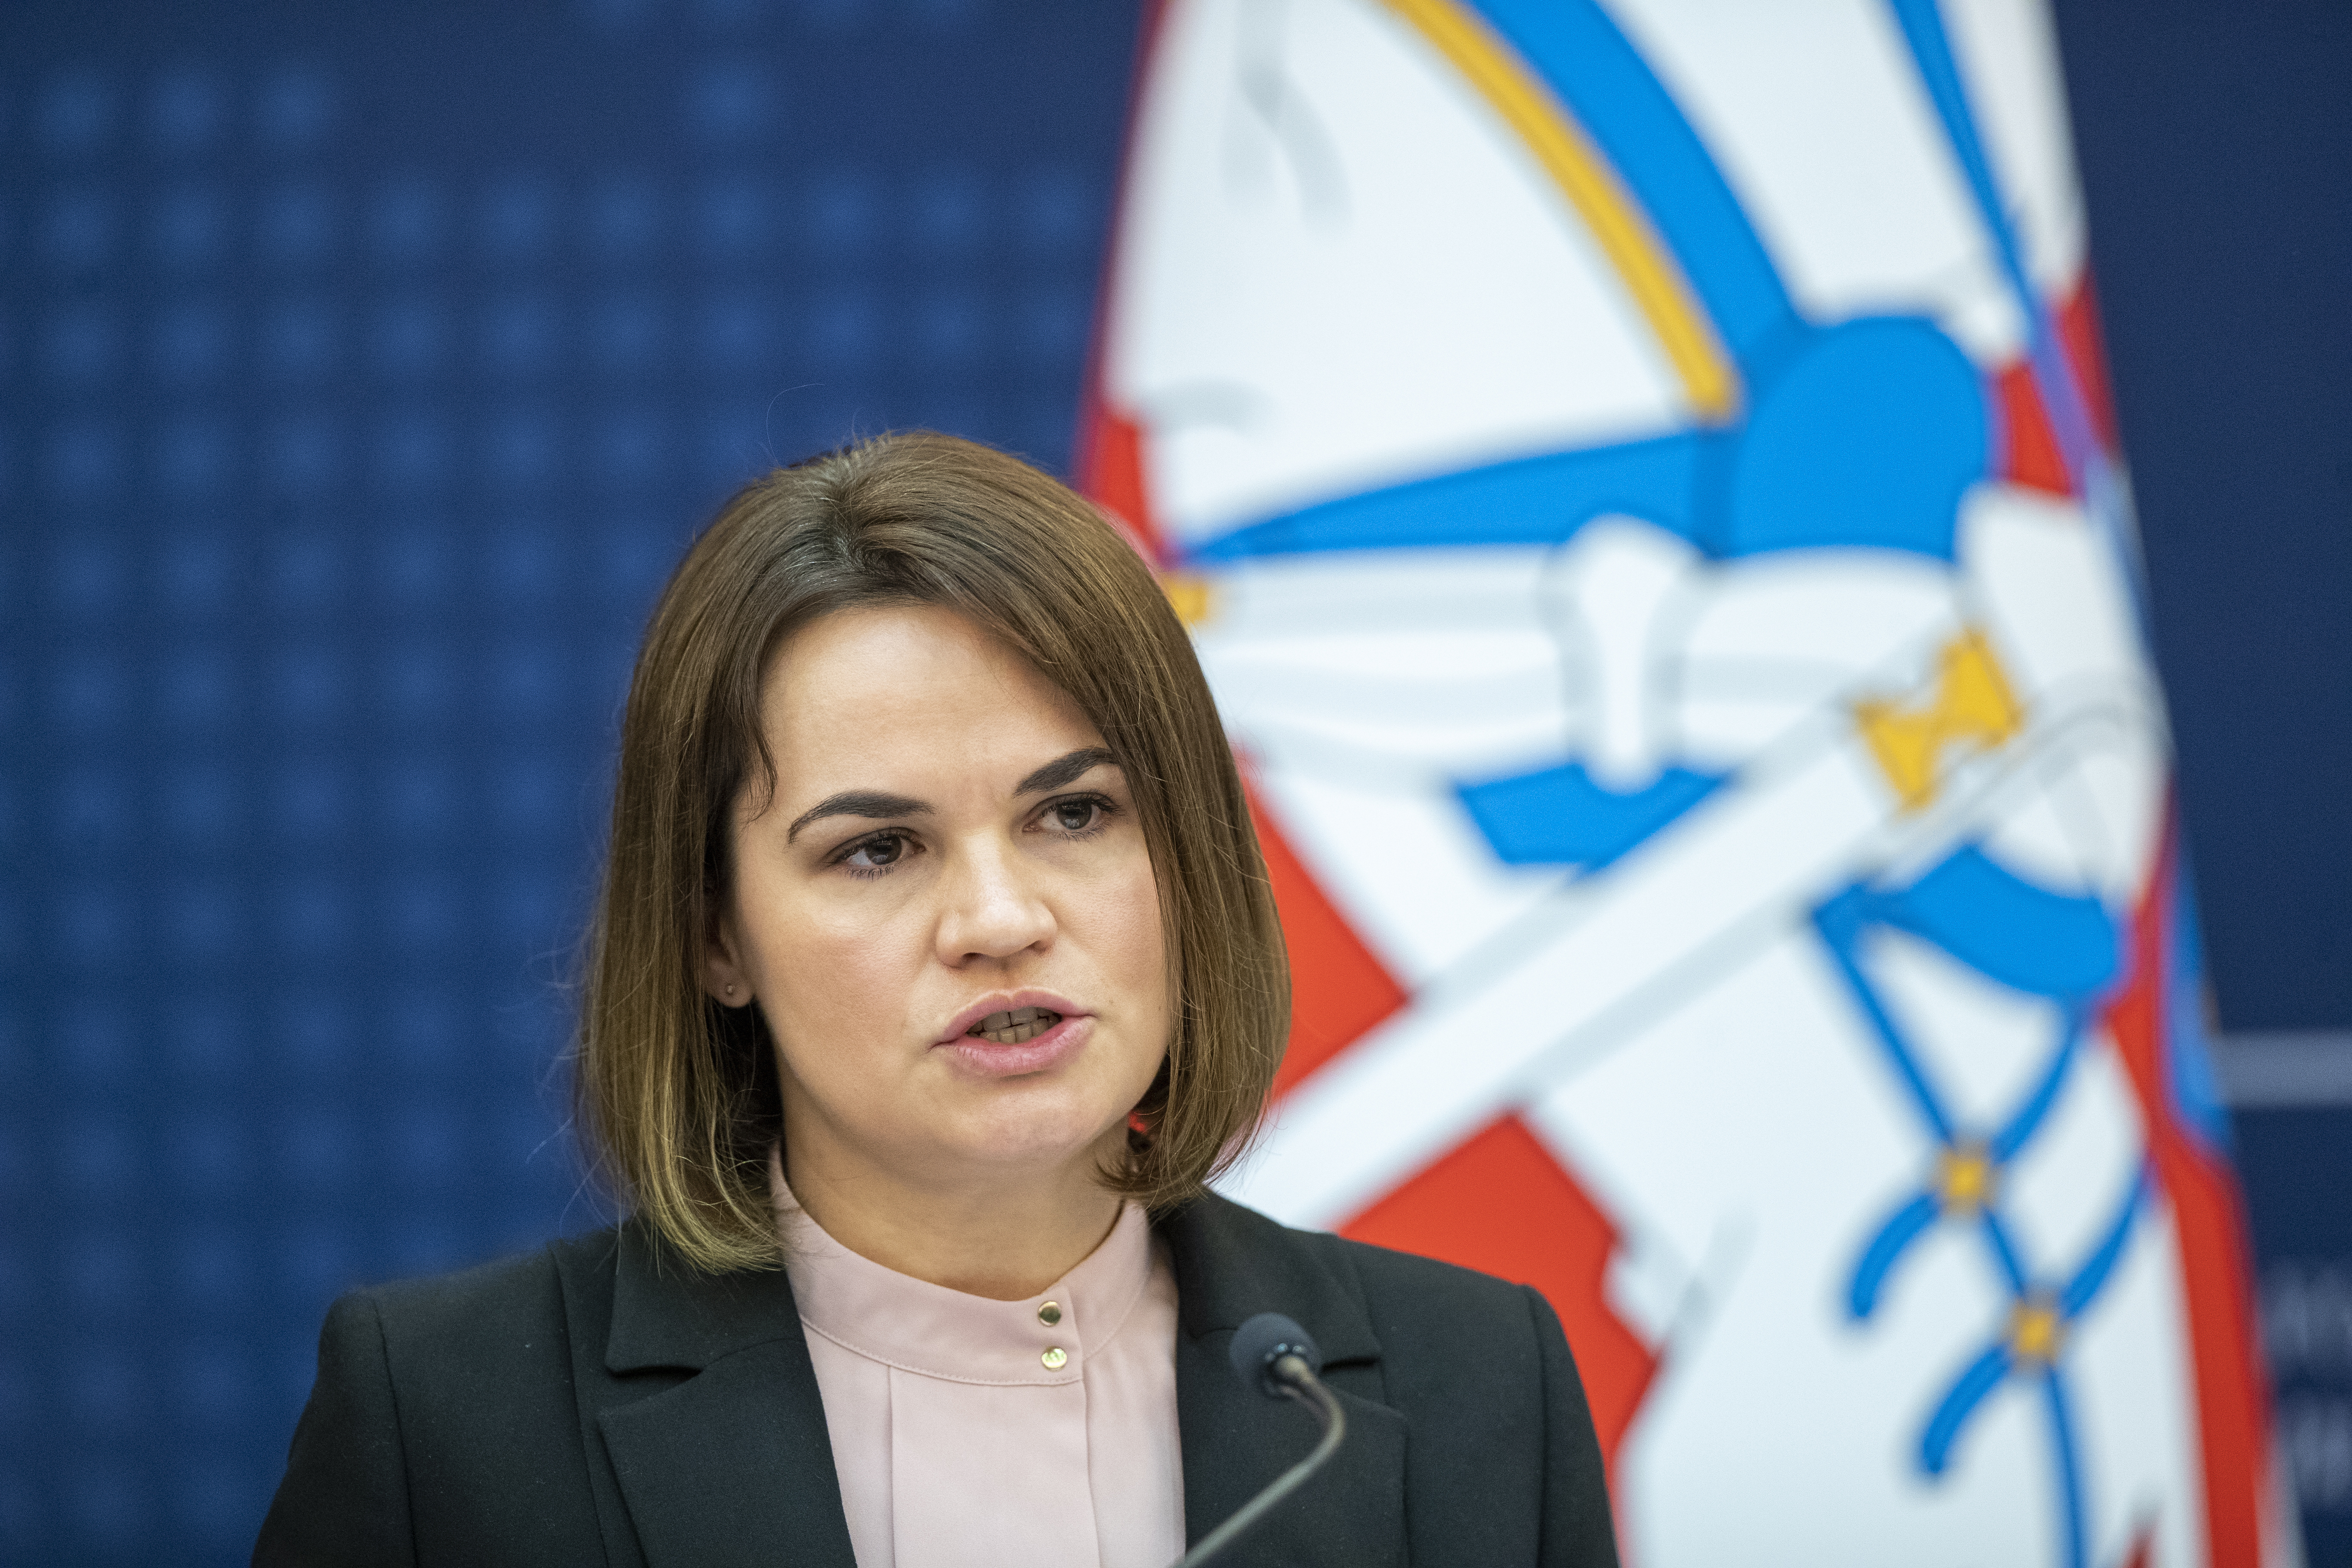 Belarusian opposition leader Sviatlana Tsikhanouskaya speaks during a press conference with Lithuania's minister of foreign affairs Gabrielius Landsbergis in the Ministry of Foreign Affairs in Vilnius, Lithuania